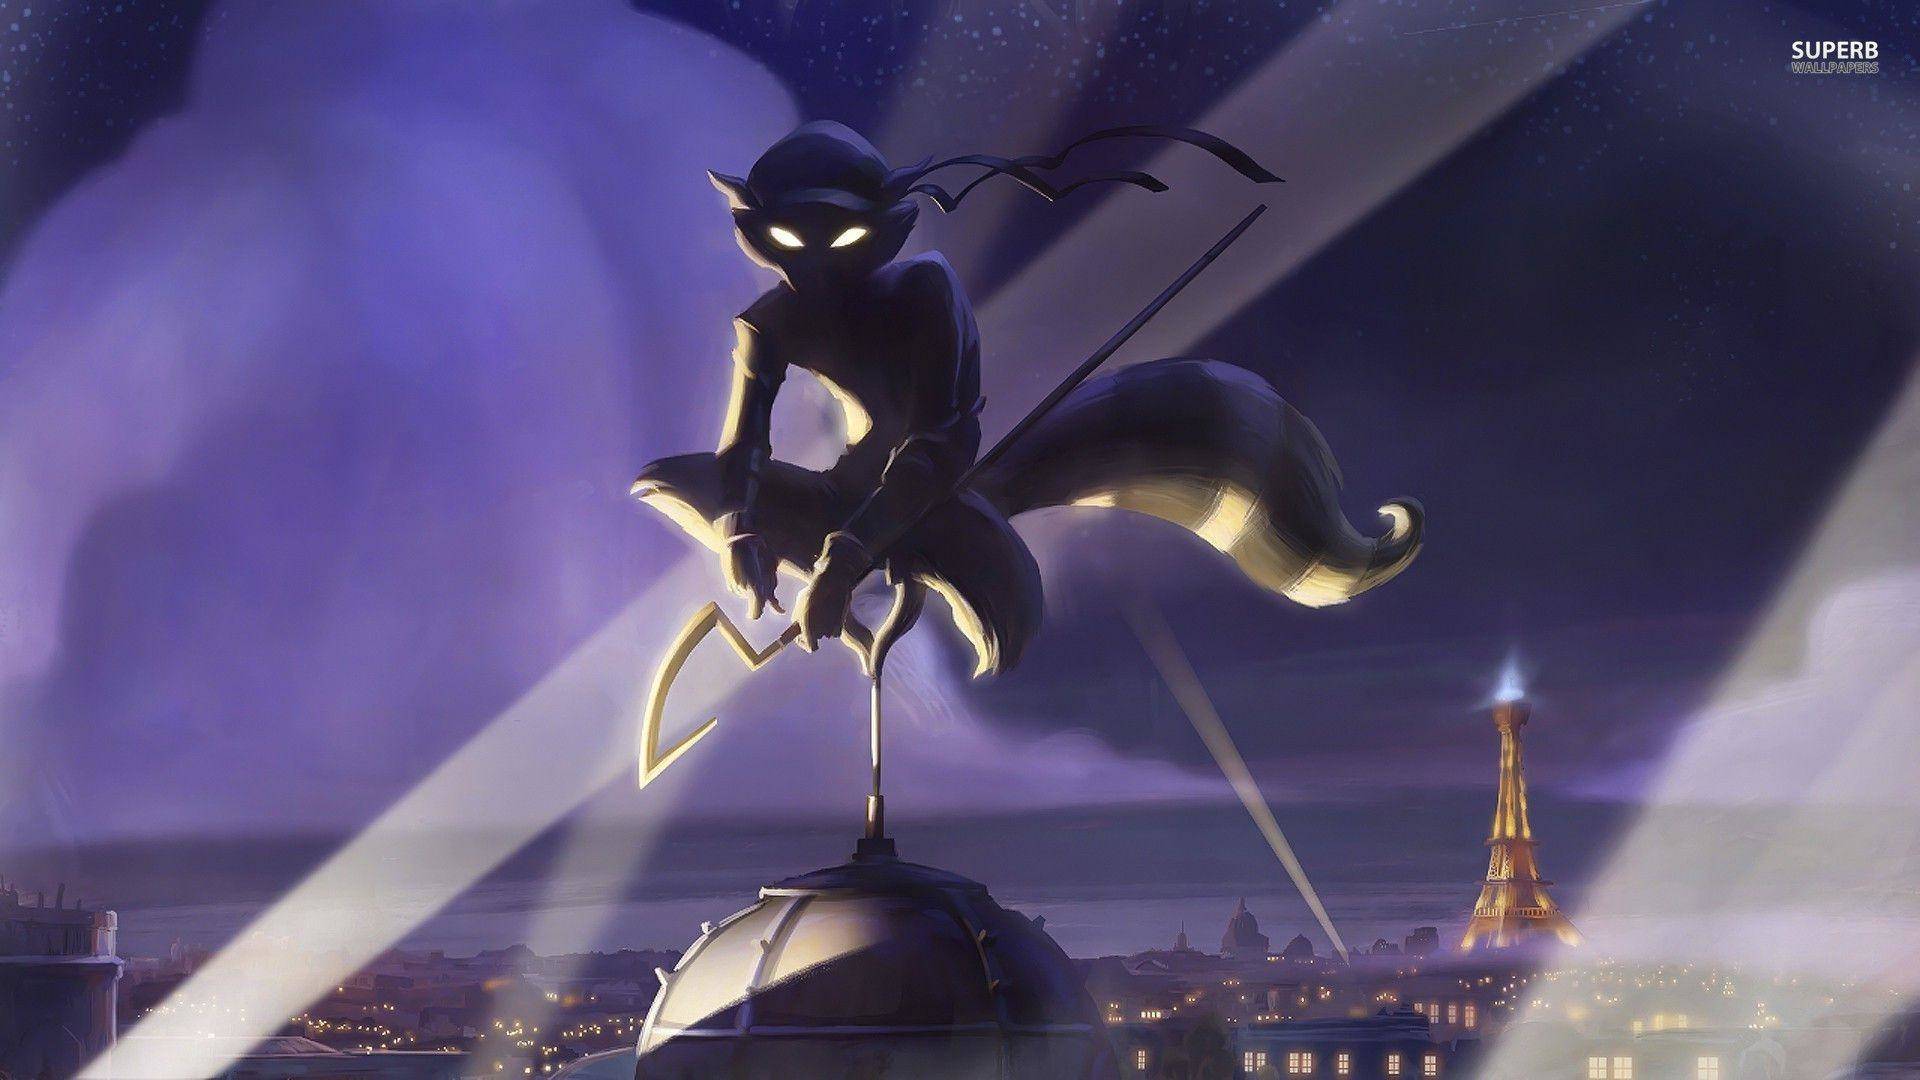 Is Sly Cooper coming back soon?